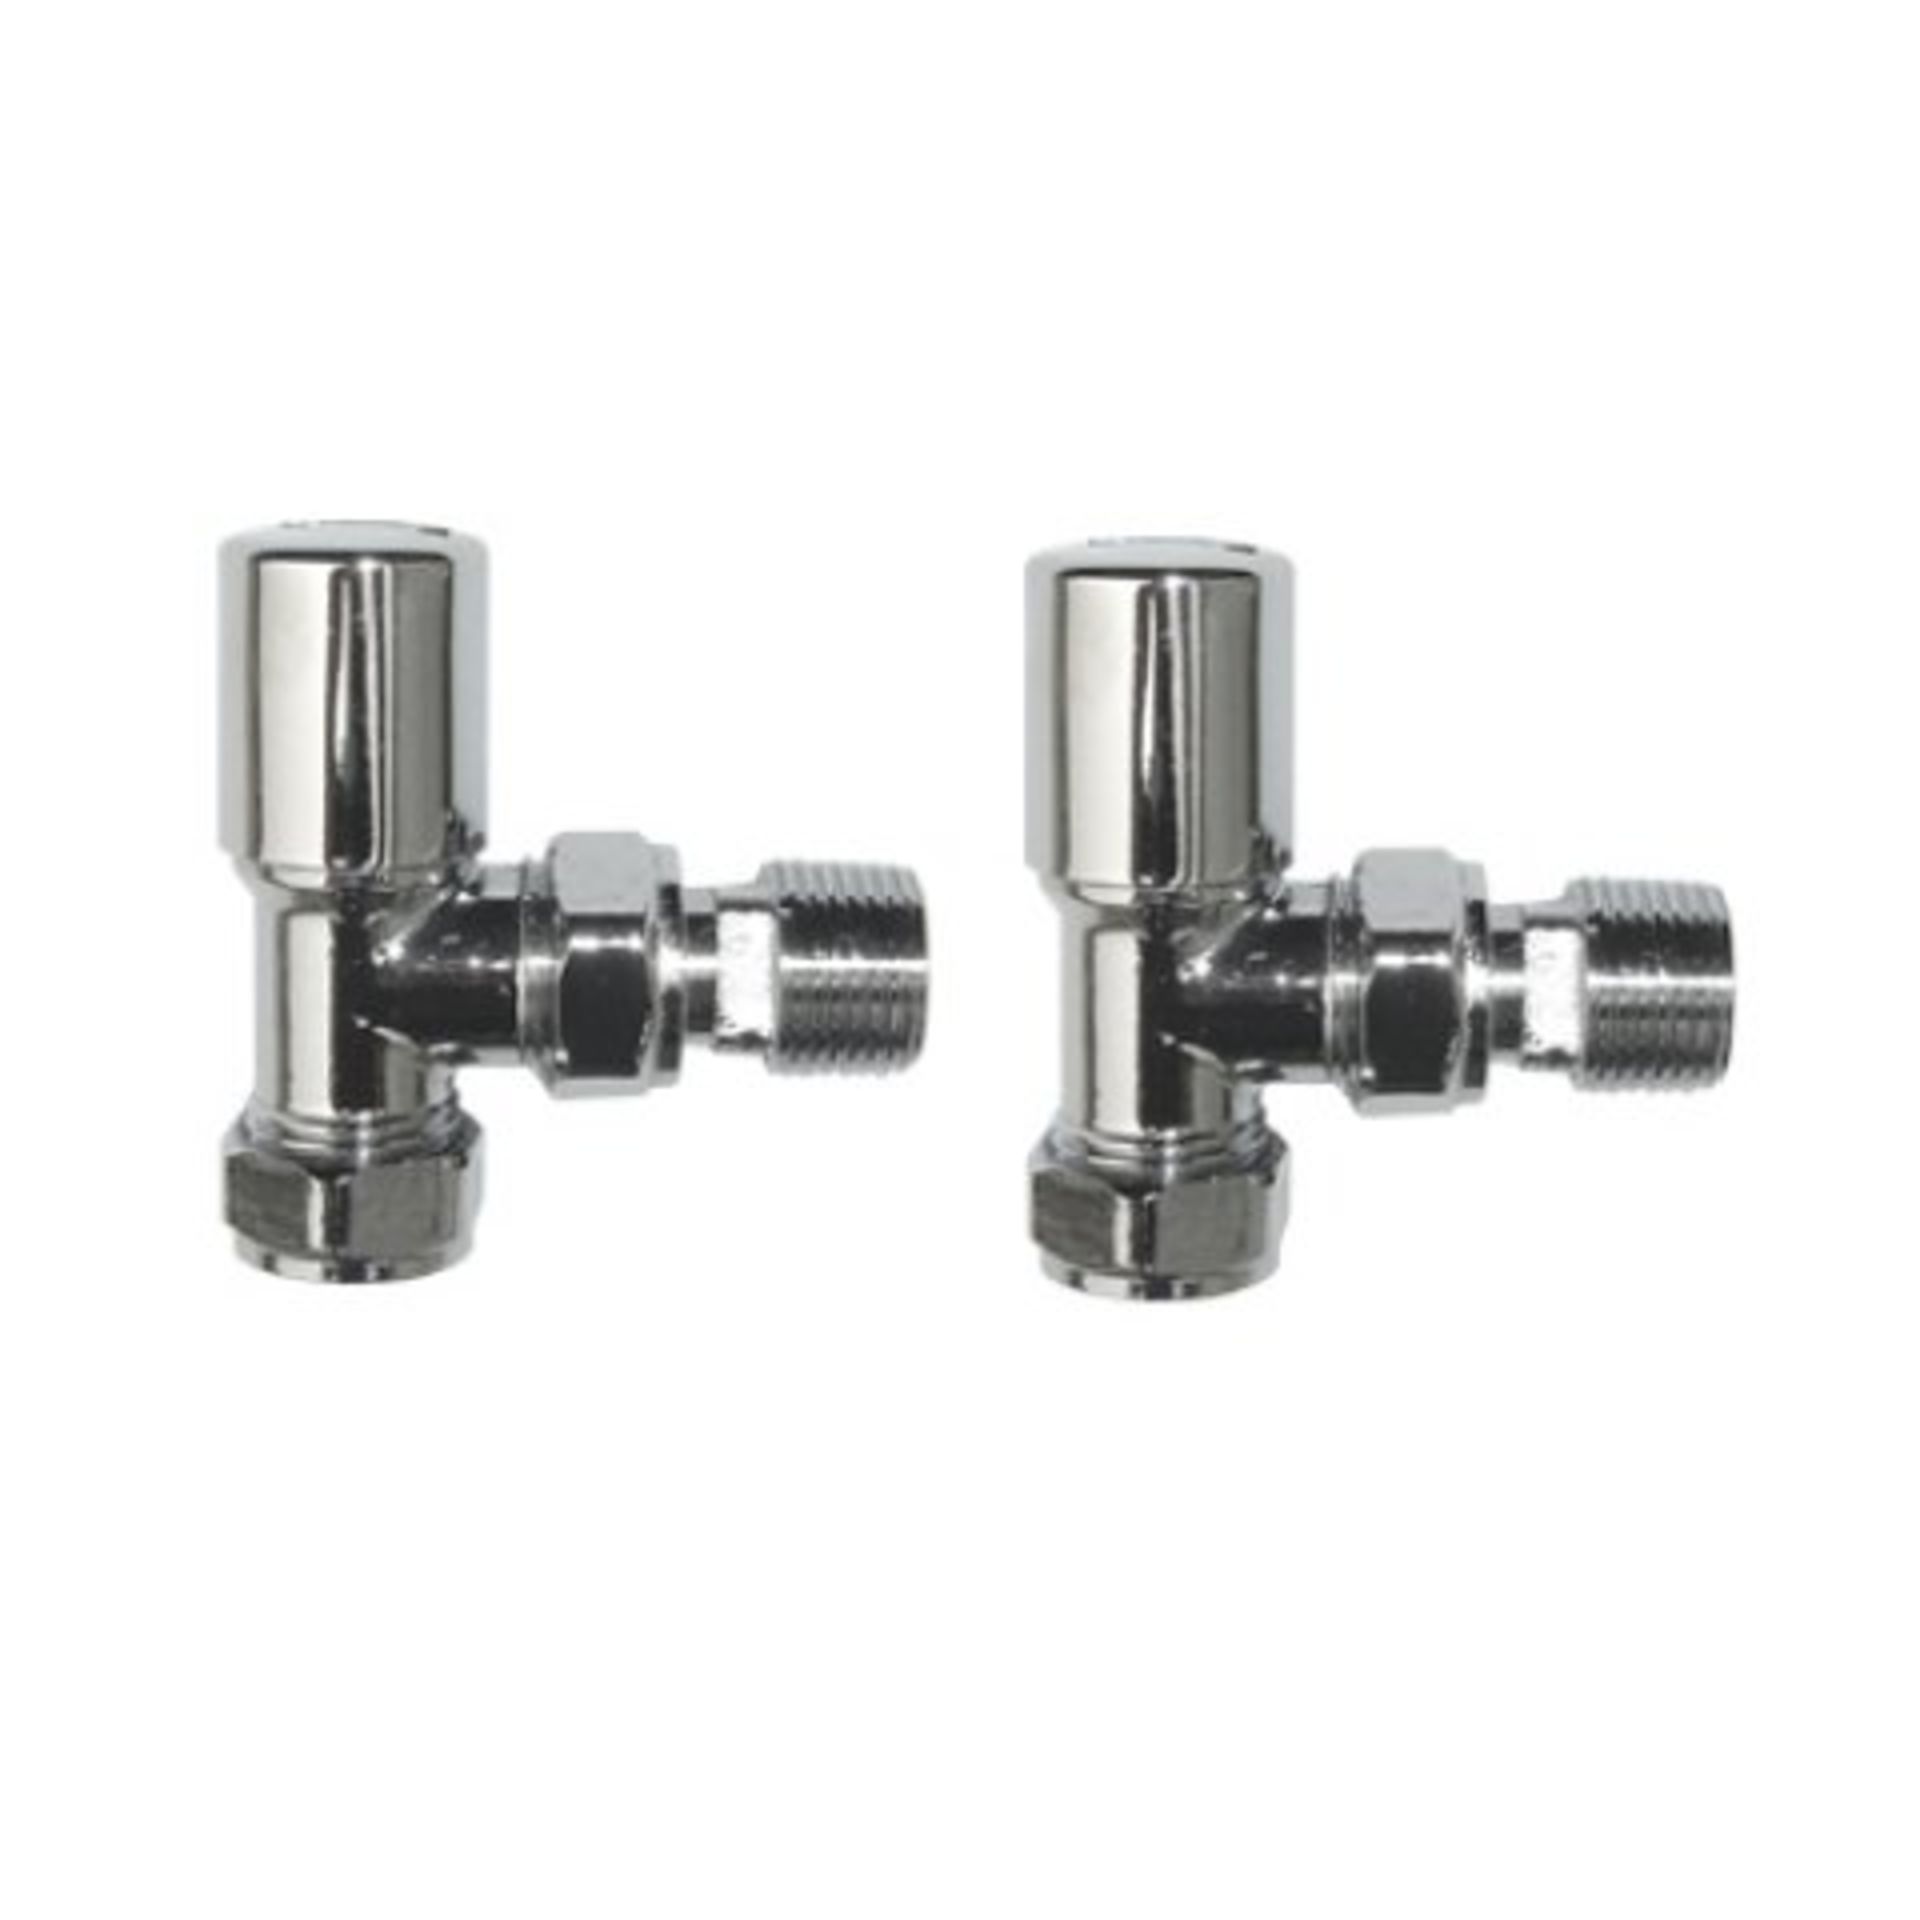 (L27) Standard 15mm Connection Angled Chrome Radiator Valves Made of solid brass, our Angled